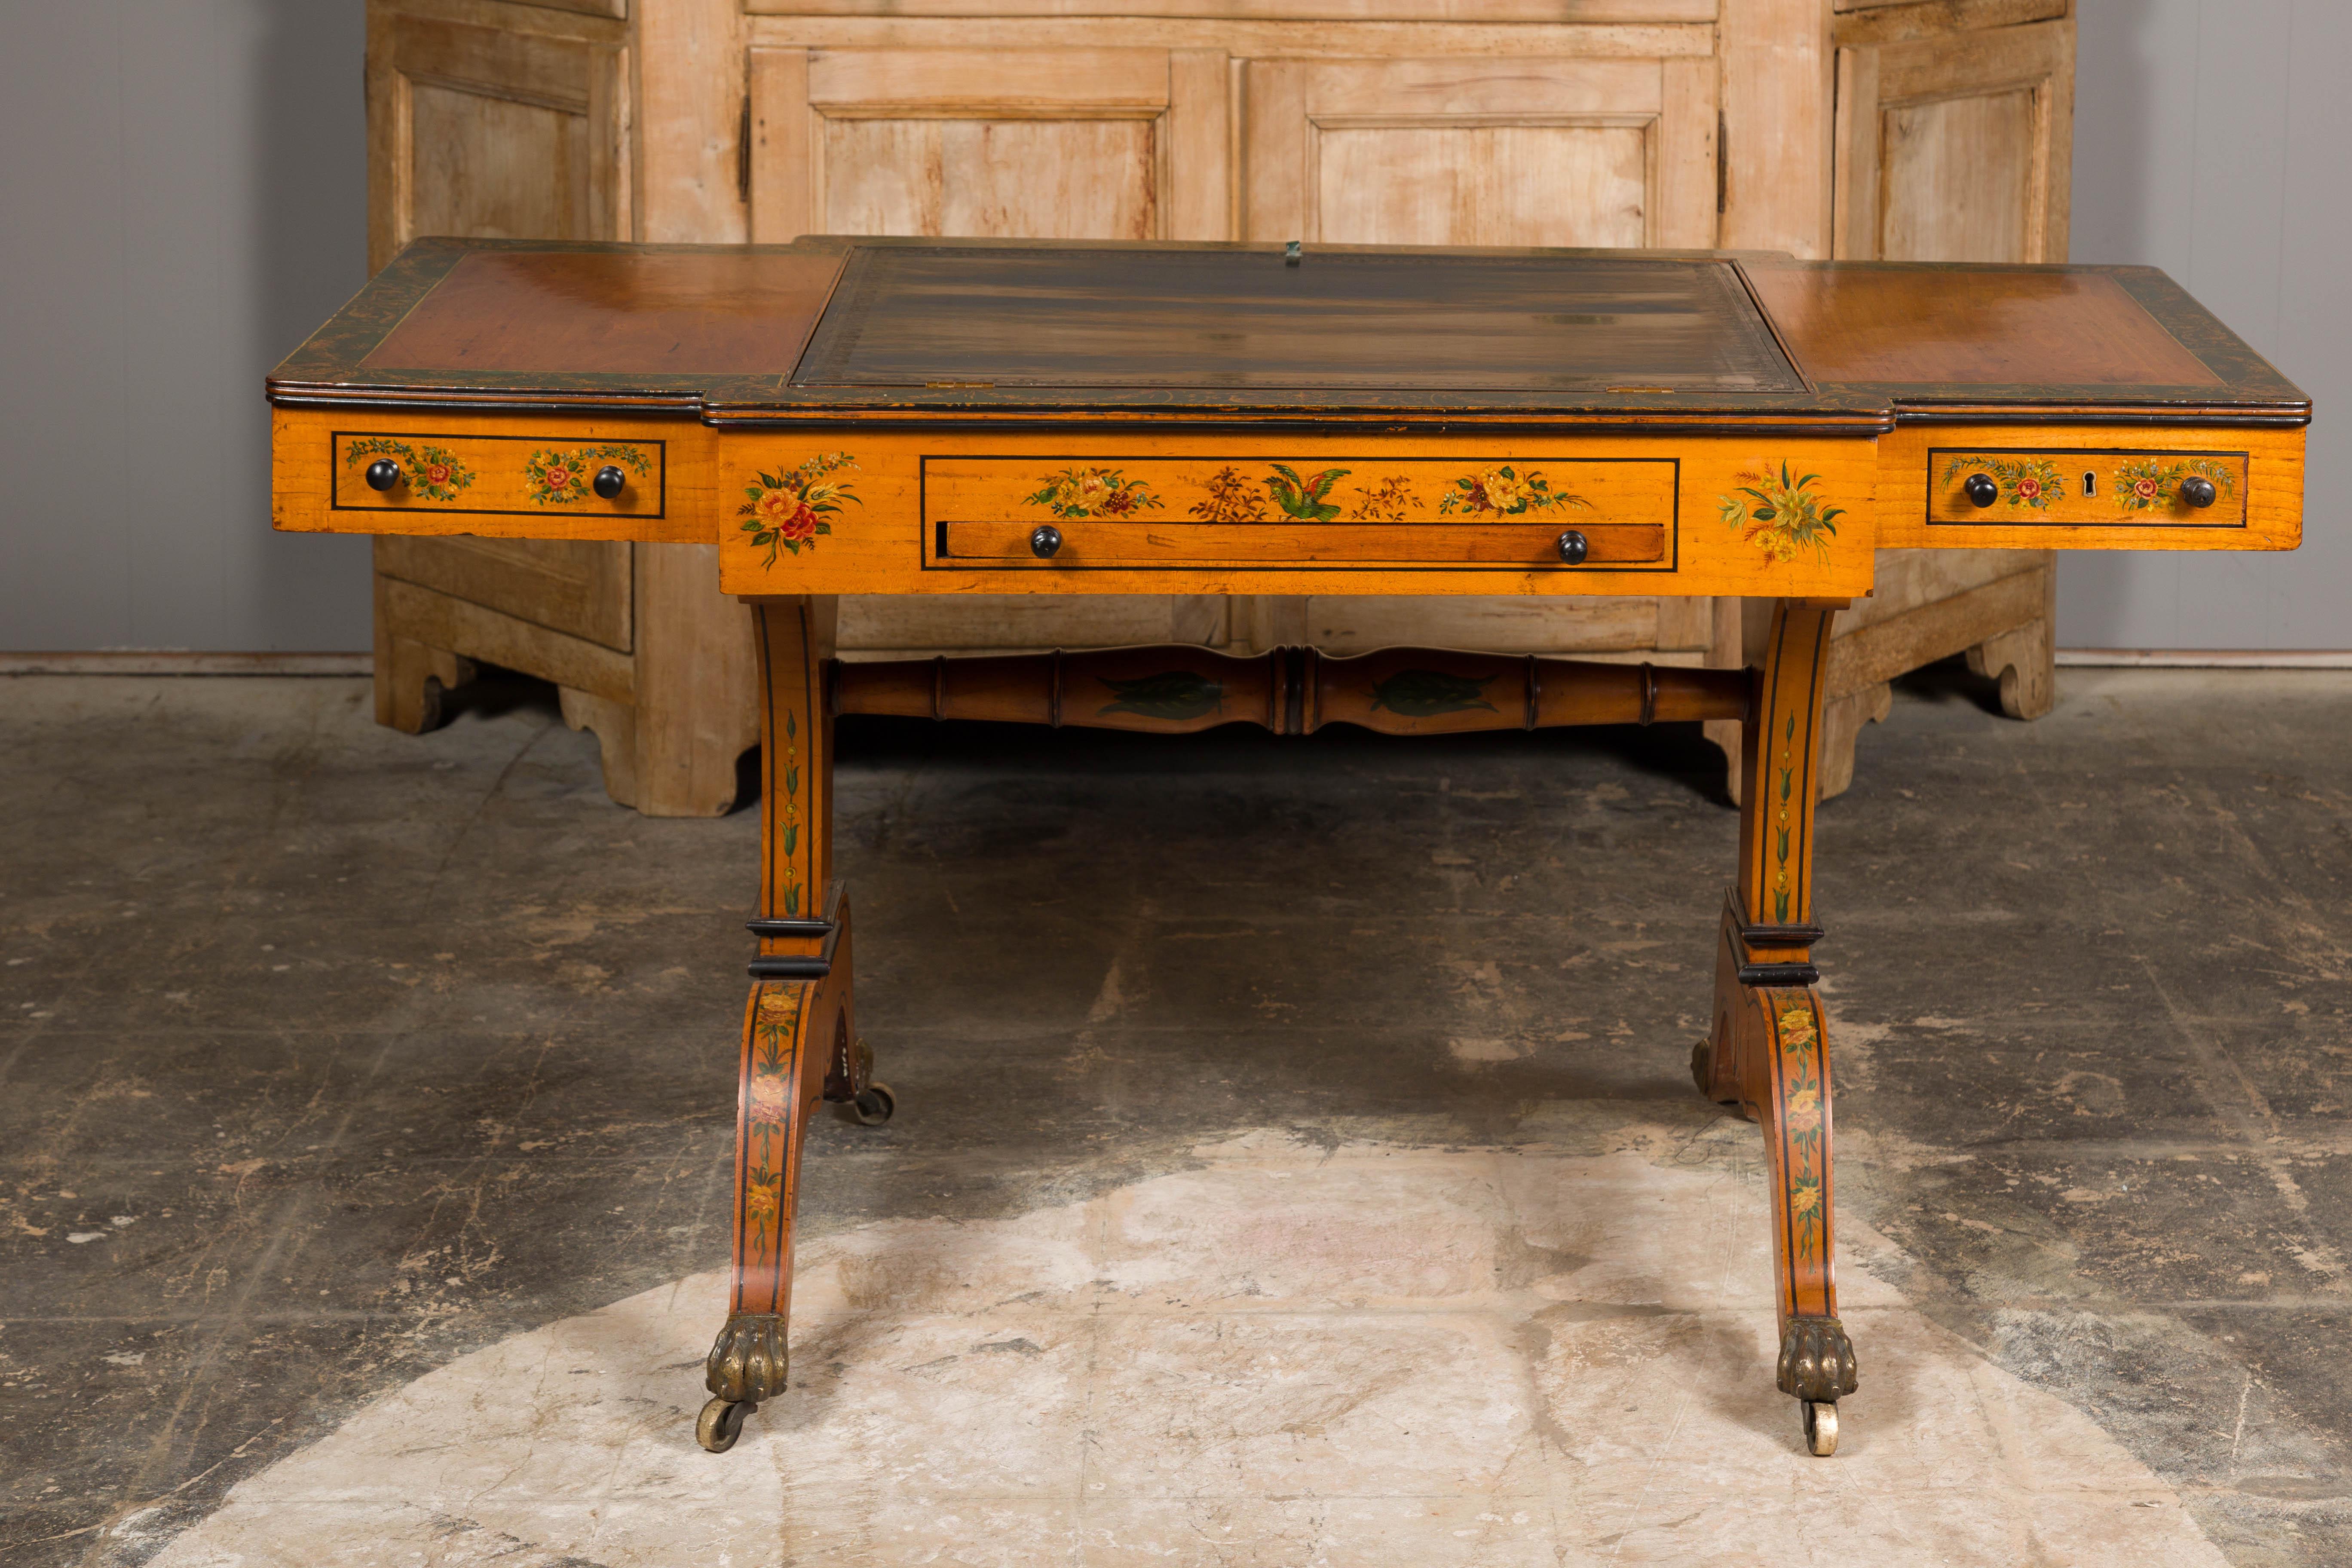 An English satinwood desk and game table from the 19th century with tilt top writing area, checkerboard and two drawers. This 19th-century English satinwood desk and game table is a masterpiece of both functionality and artistic craftsmanship. Its